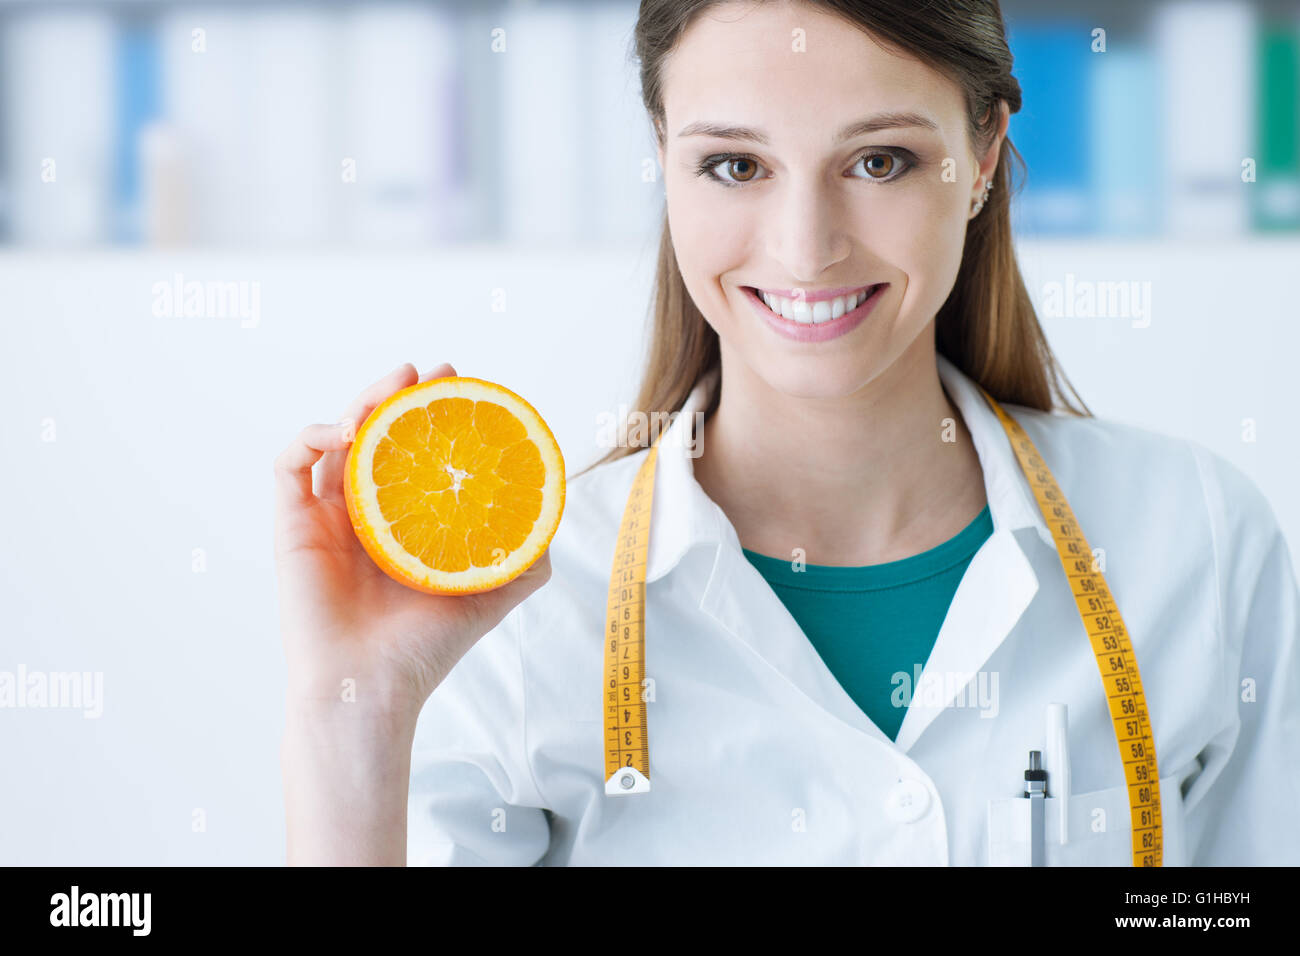 Smiling nutritionist holding a sliced orange, vitamins and healthy diet concept Stock Photo